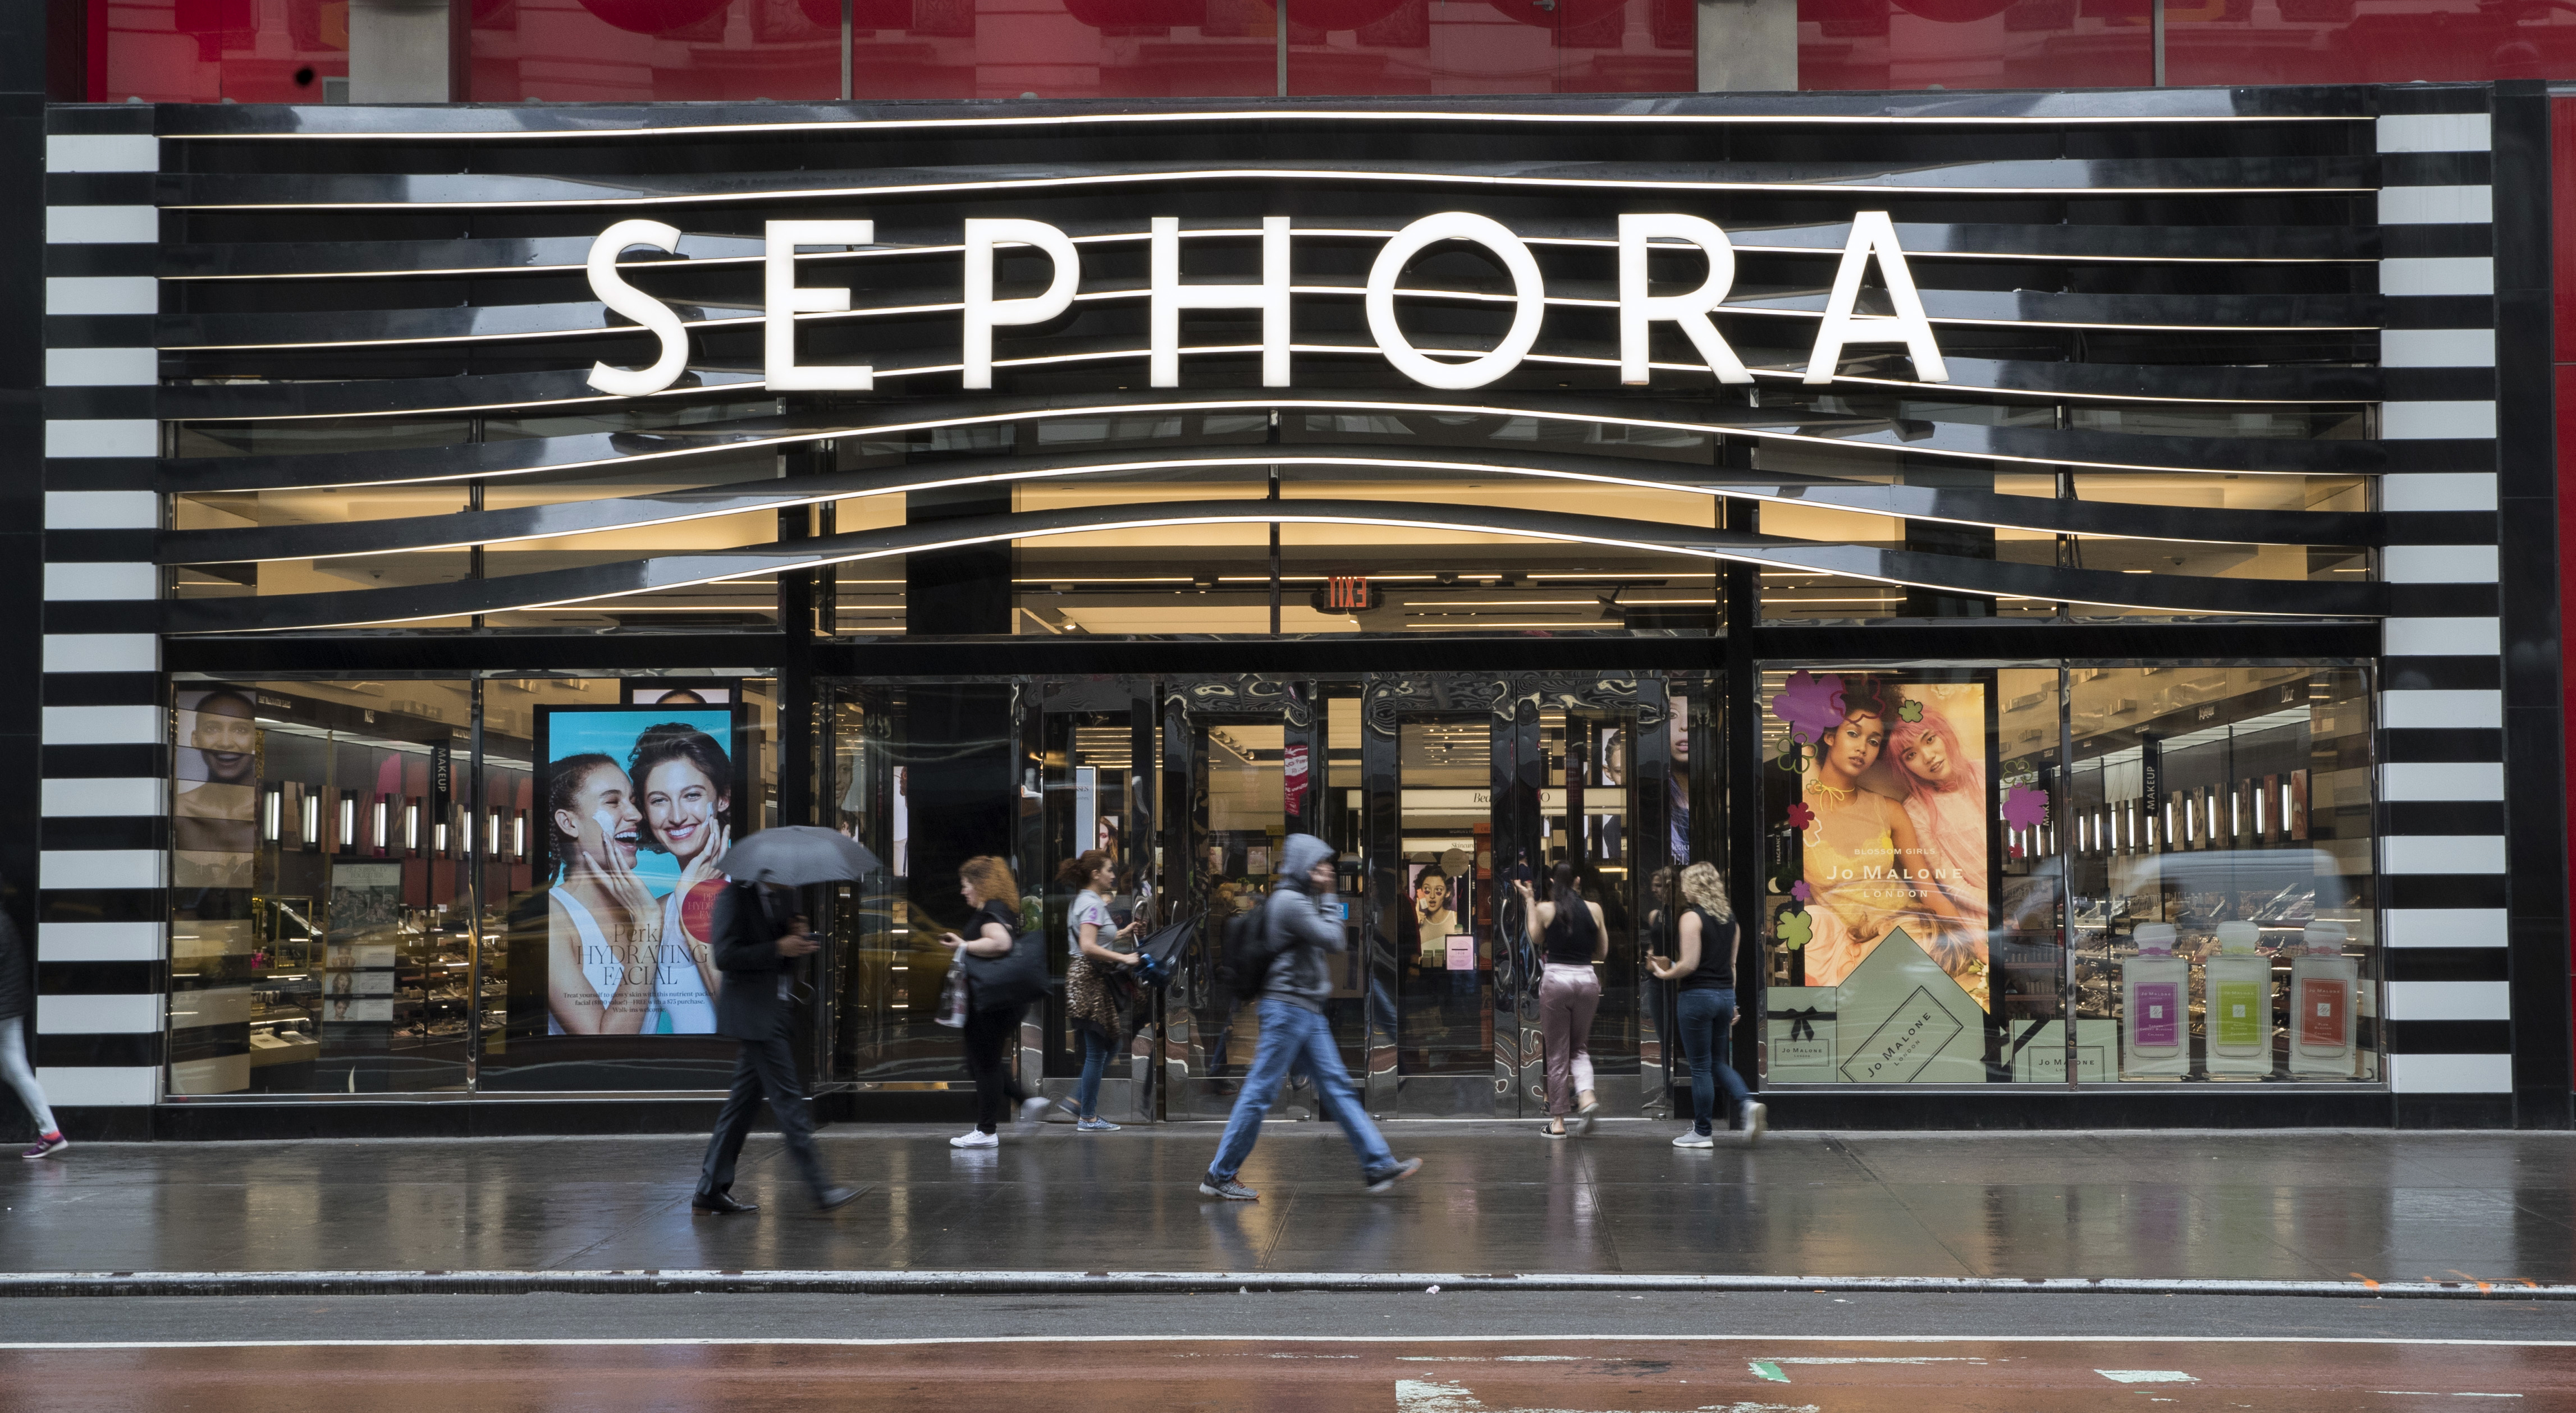 Sephora Launches in 200 Kohl's Stores Nationwide Fall 2021, Details,  Photos